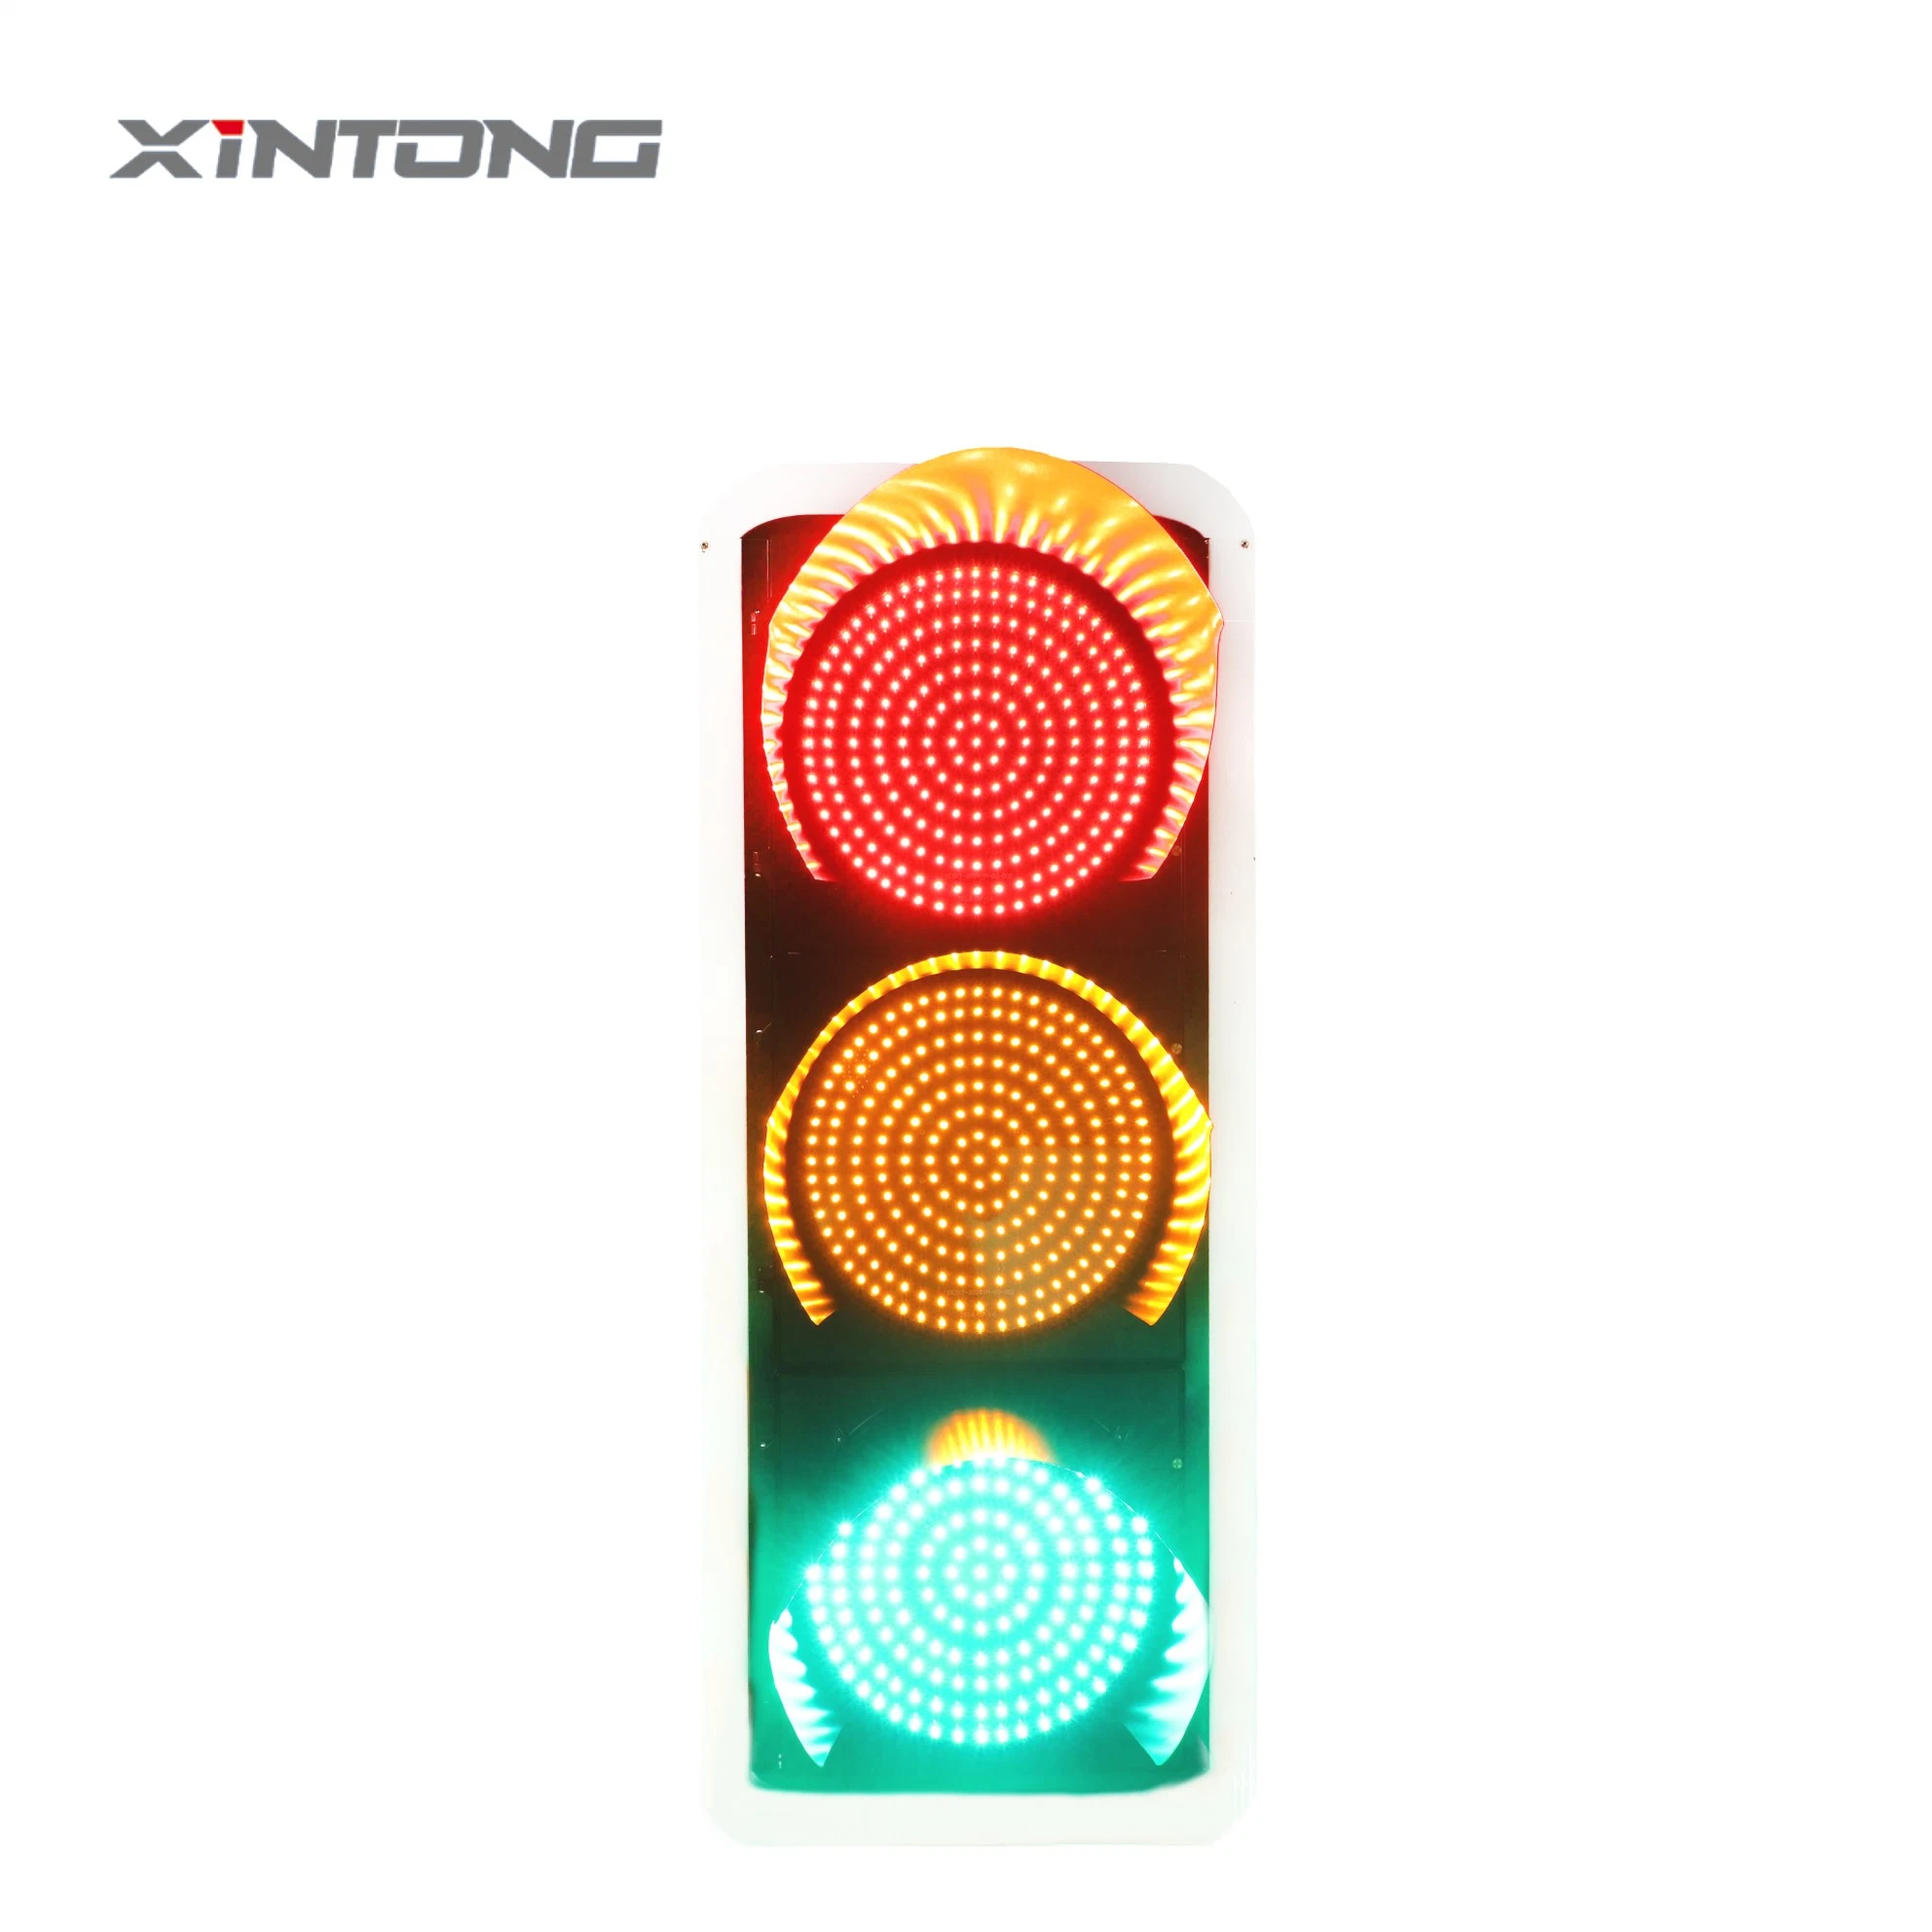 Effortlessly Manage Traffic Signals Remotely with Our Advanced Control